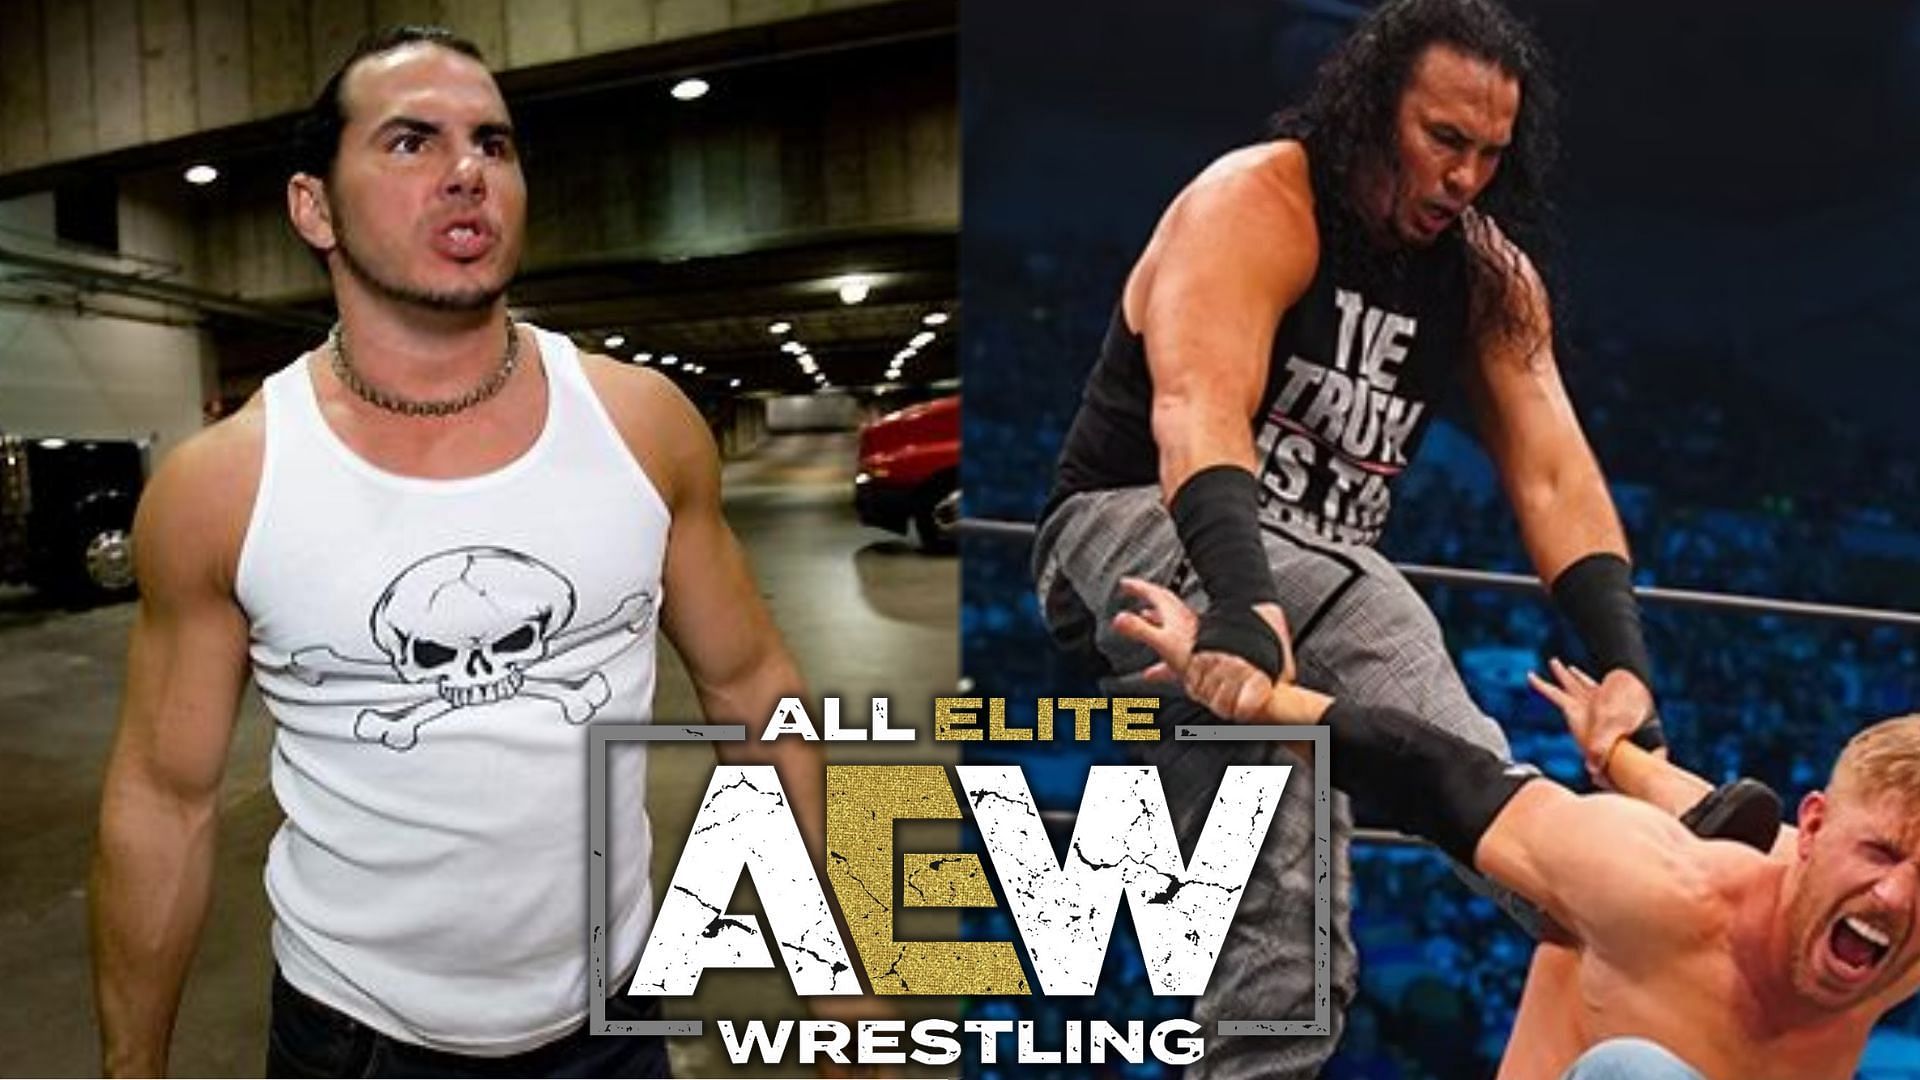 Matt Hardy has gone toe-to-toe with the best in the industry.